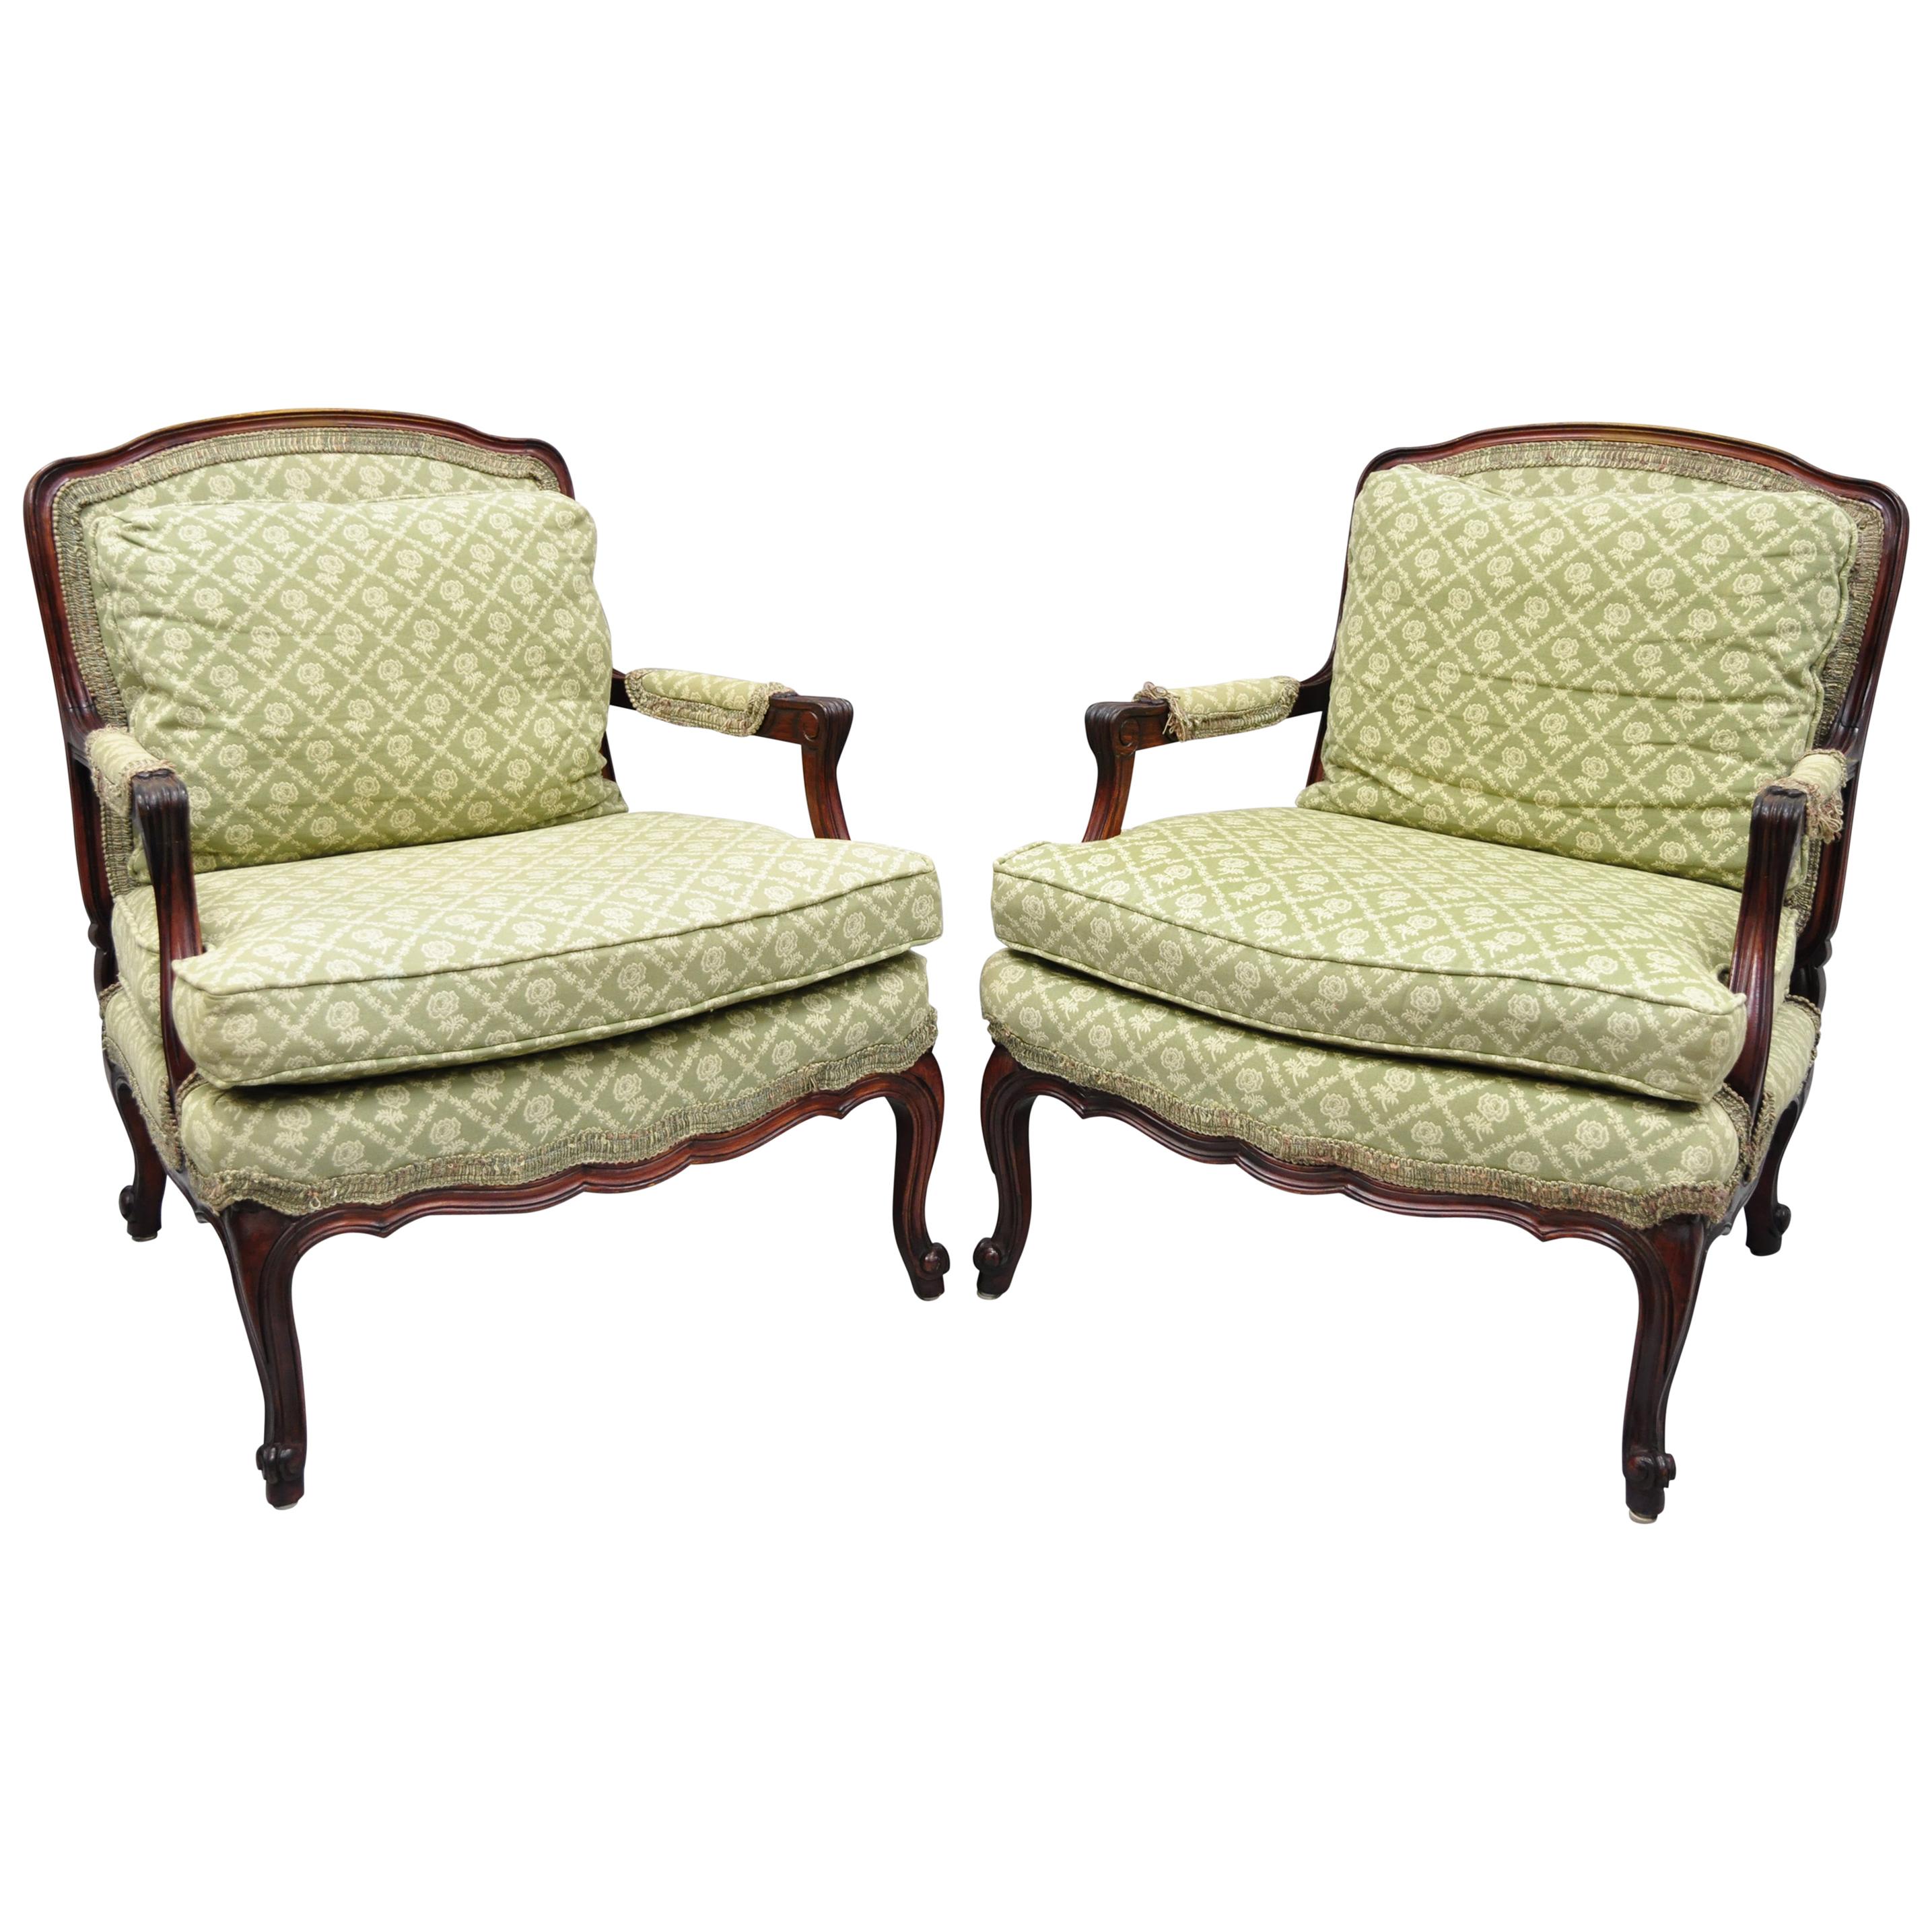 Pair of French Country Louis XV Style Mahogany Bergere Chairs Armchairs